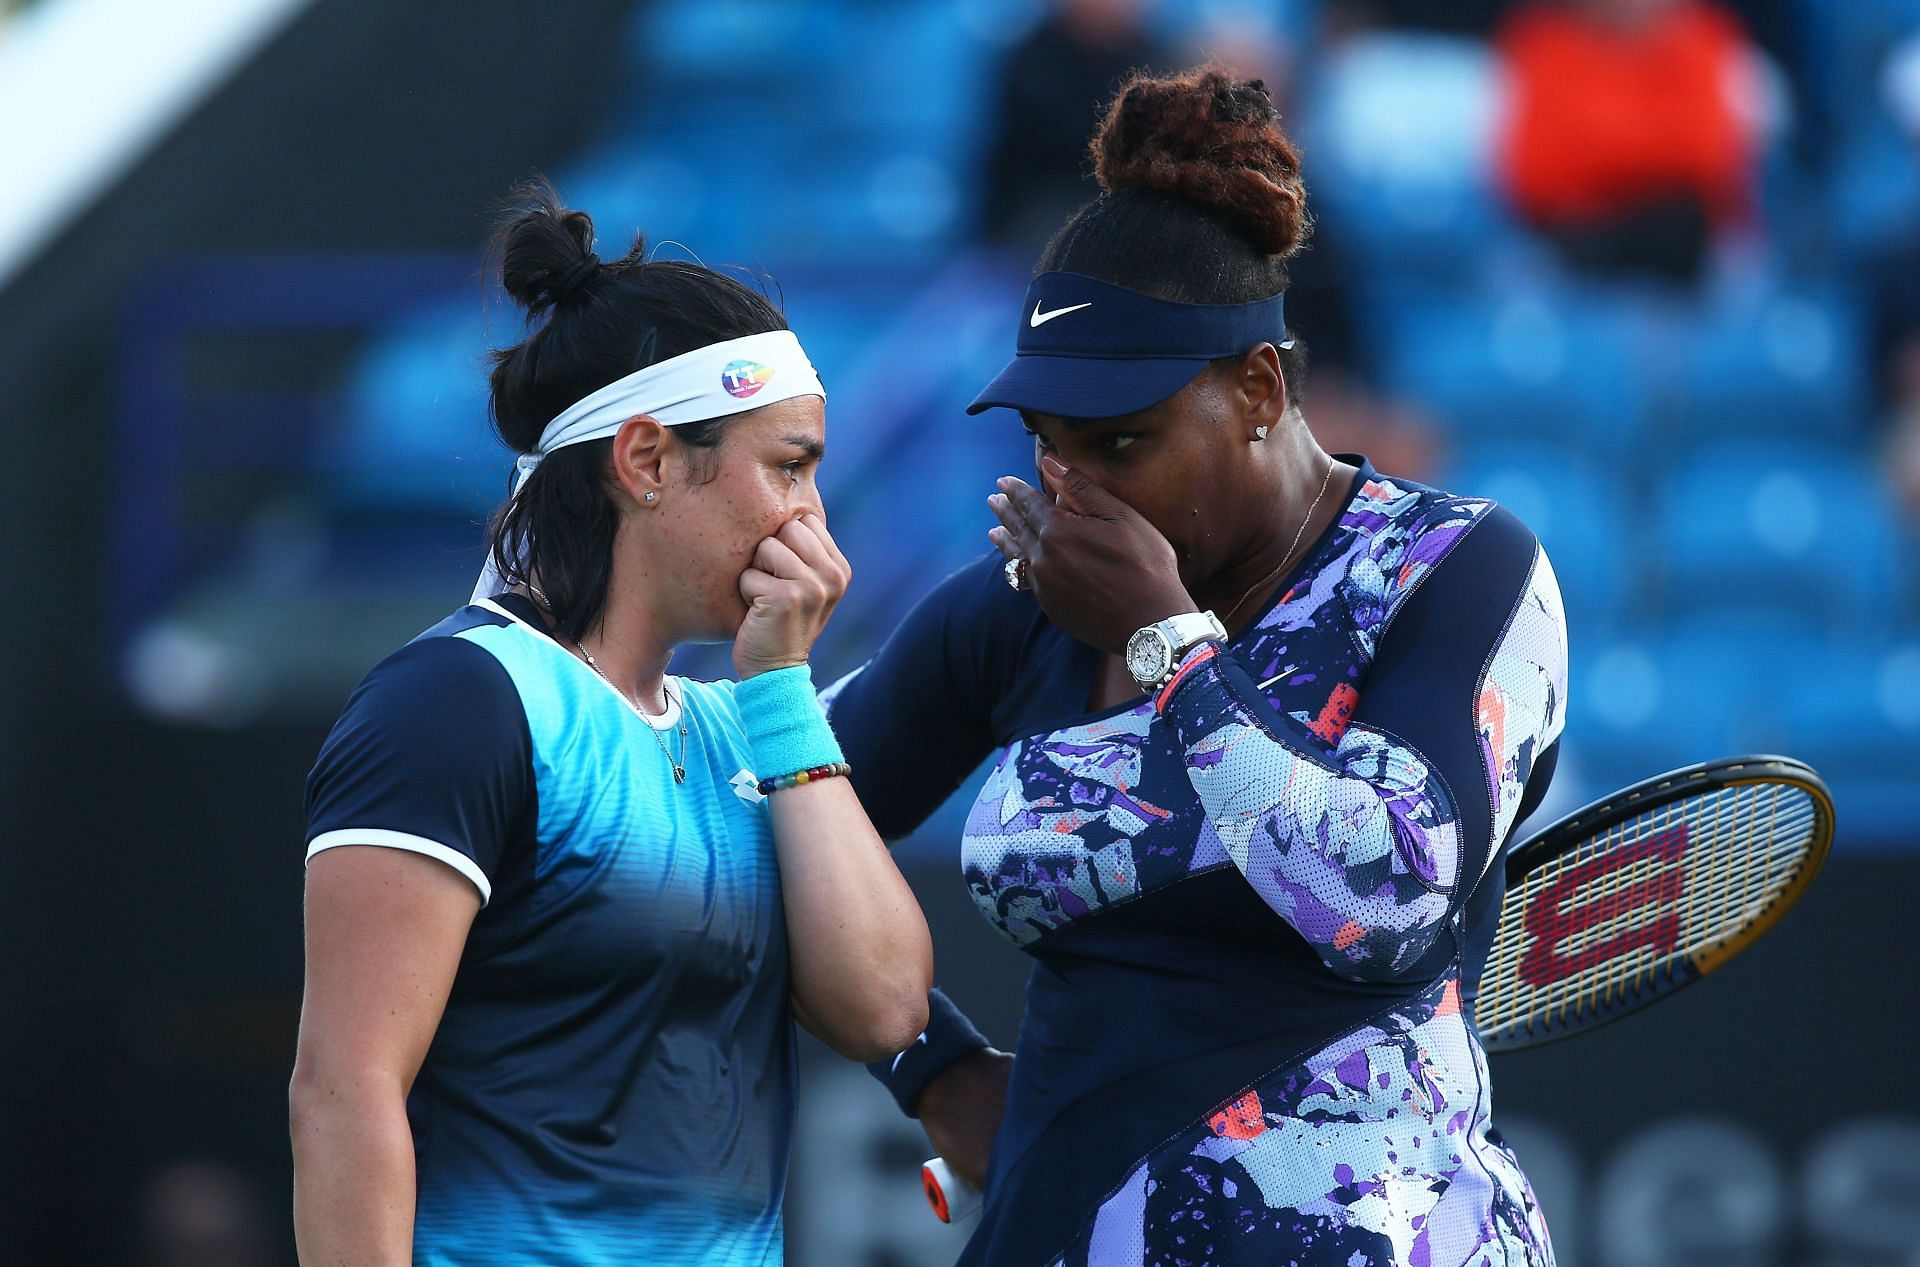 Serena Williams could meet her doubles partner Ons Jabeur in the final at Wimbledon